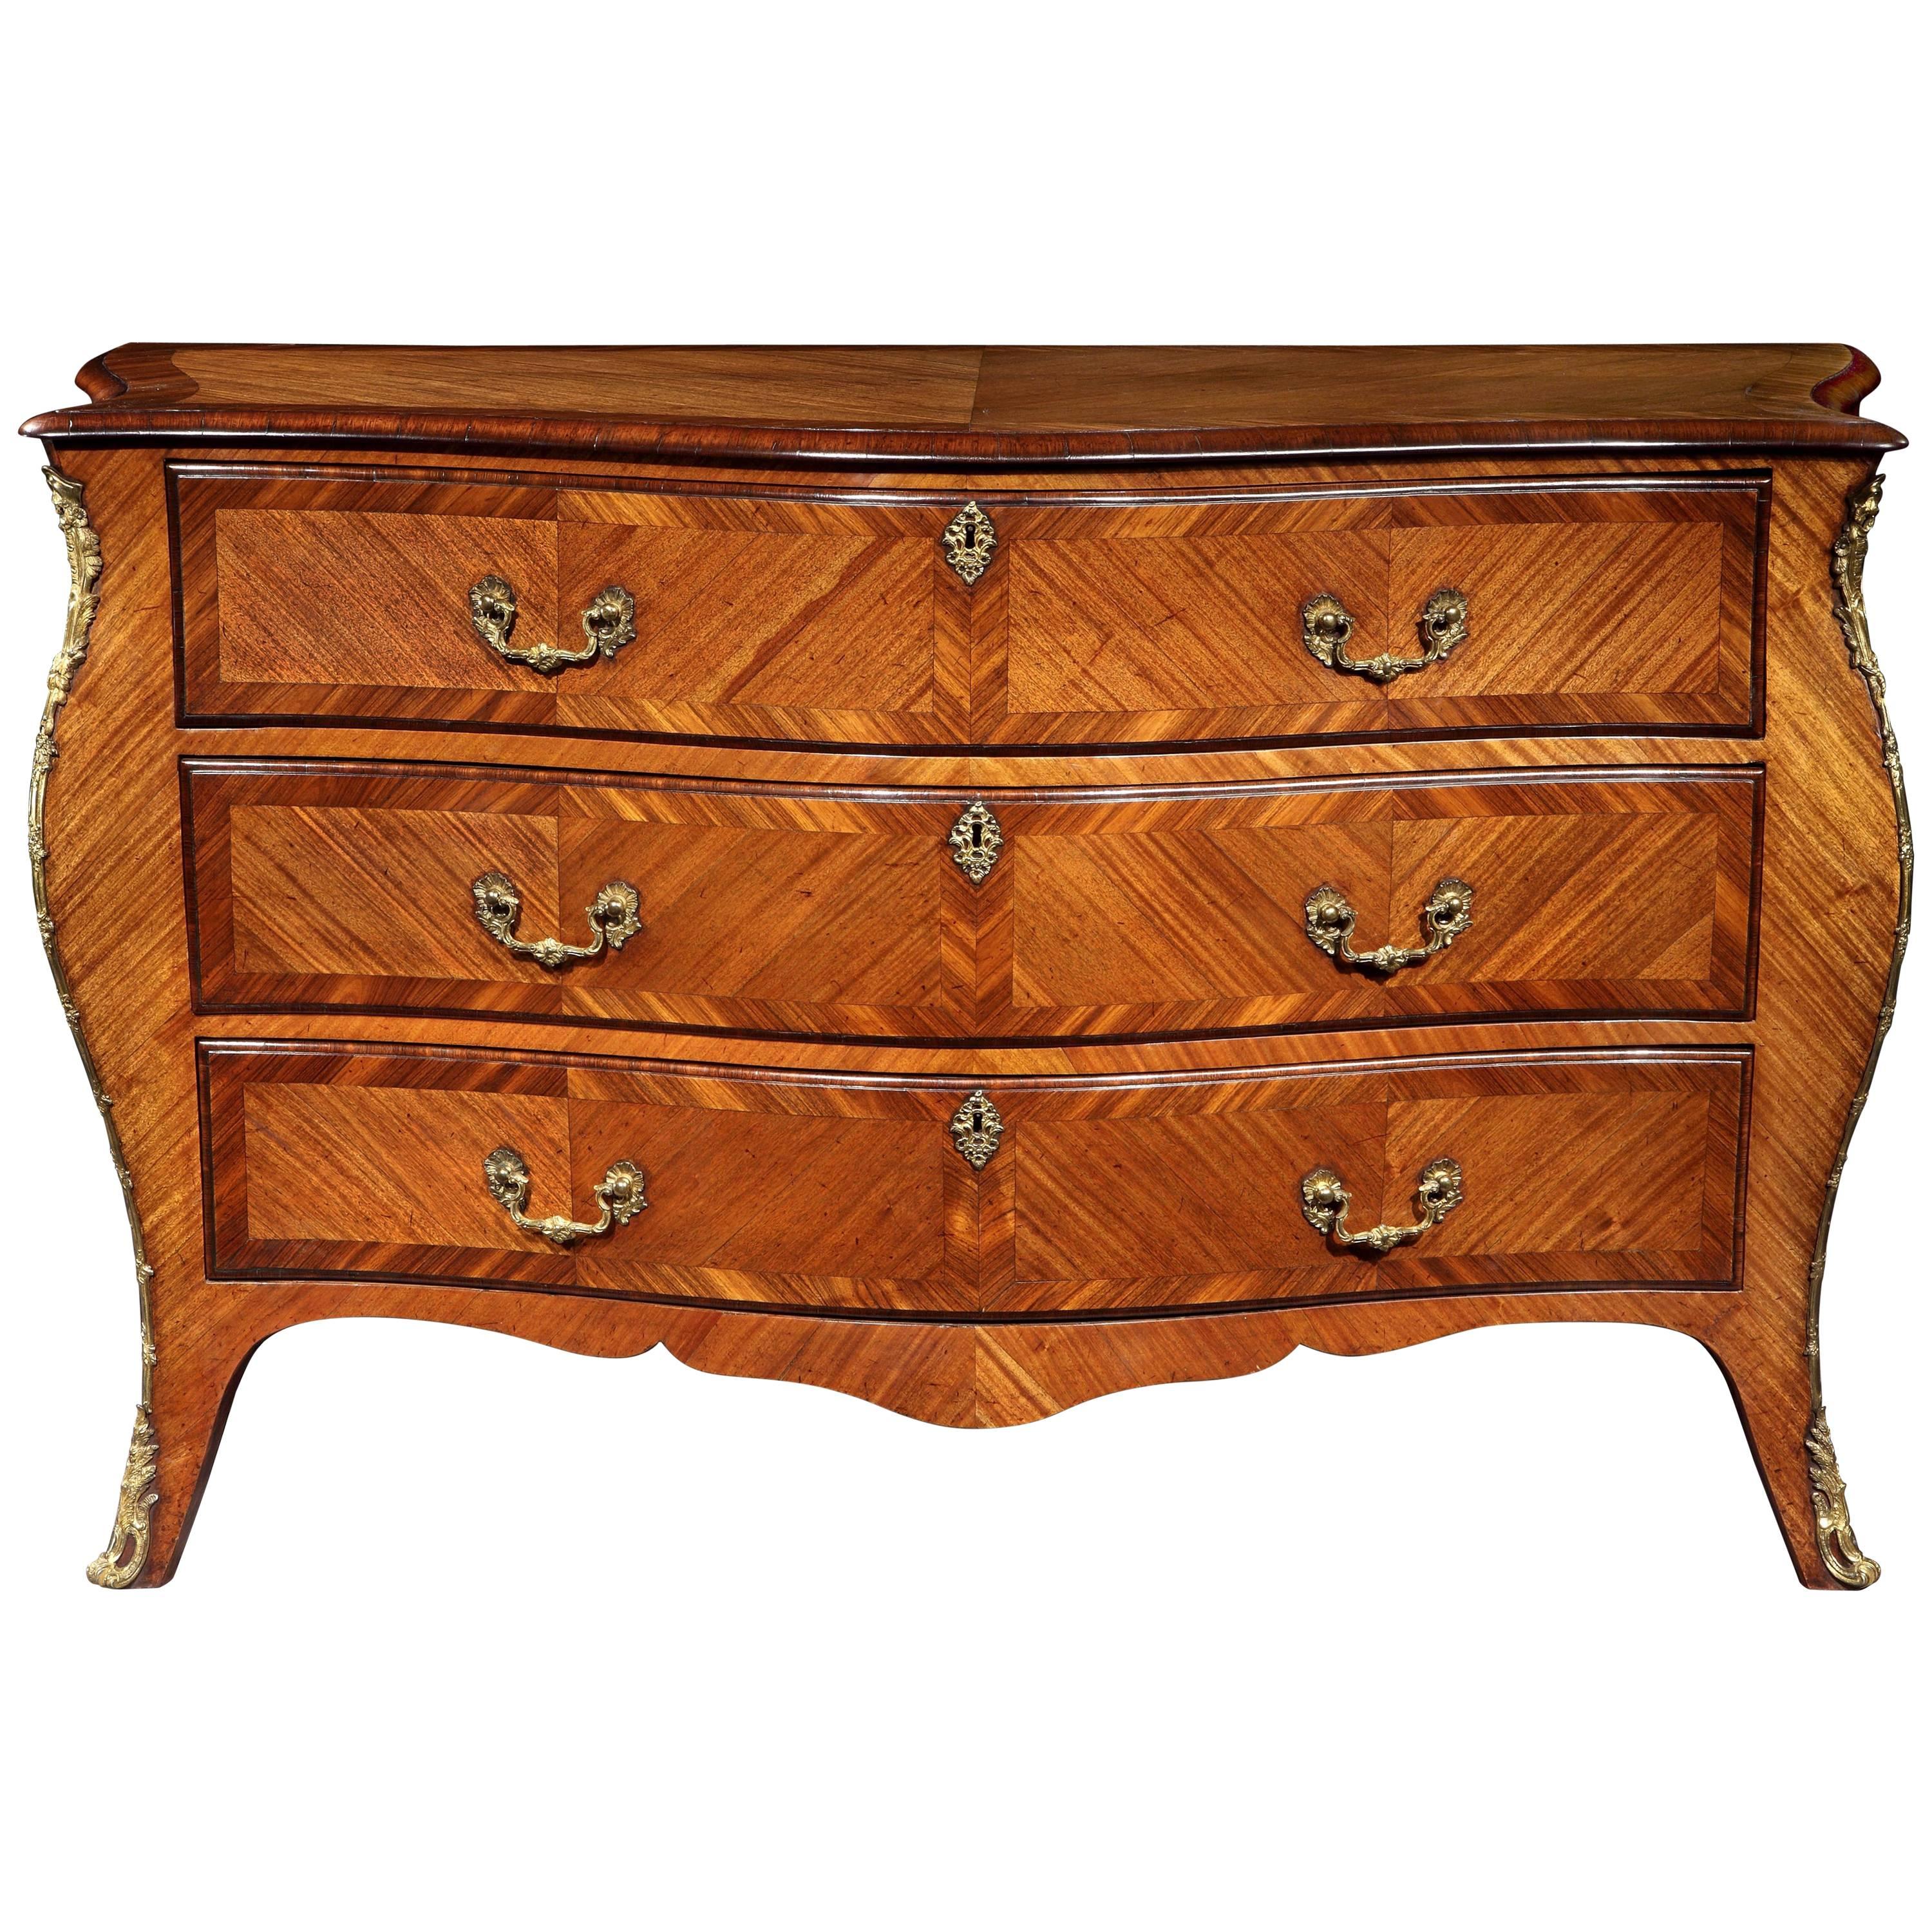 Rococo style ormolu mounted kingwood, rosewood French commode with ...